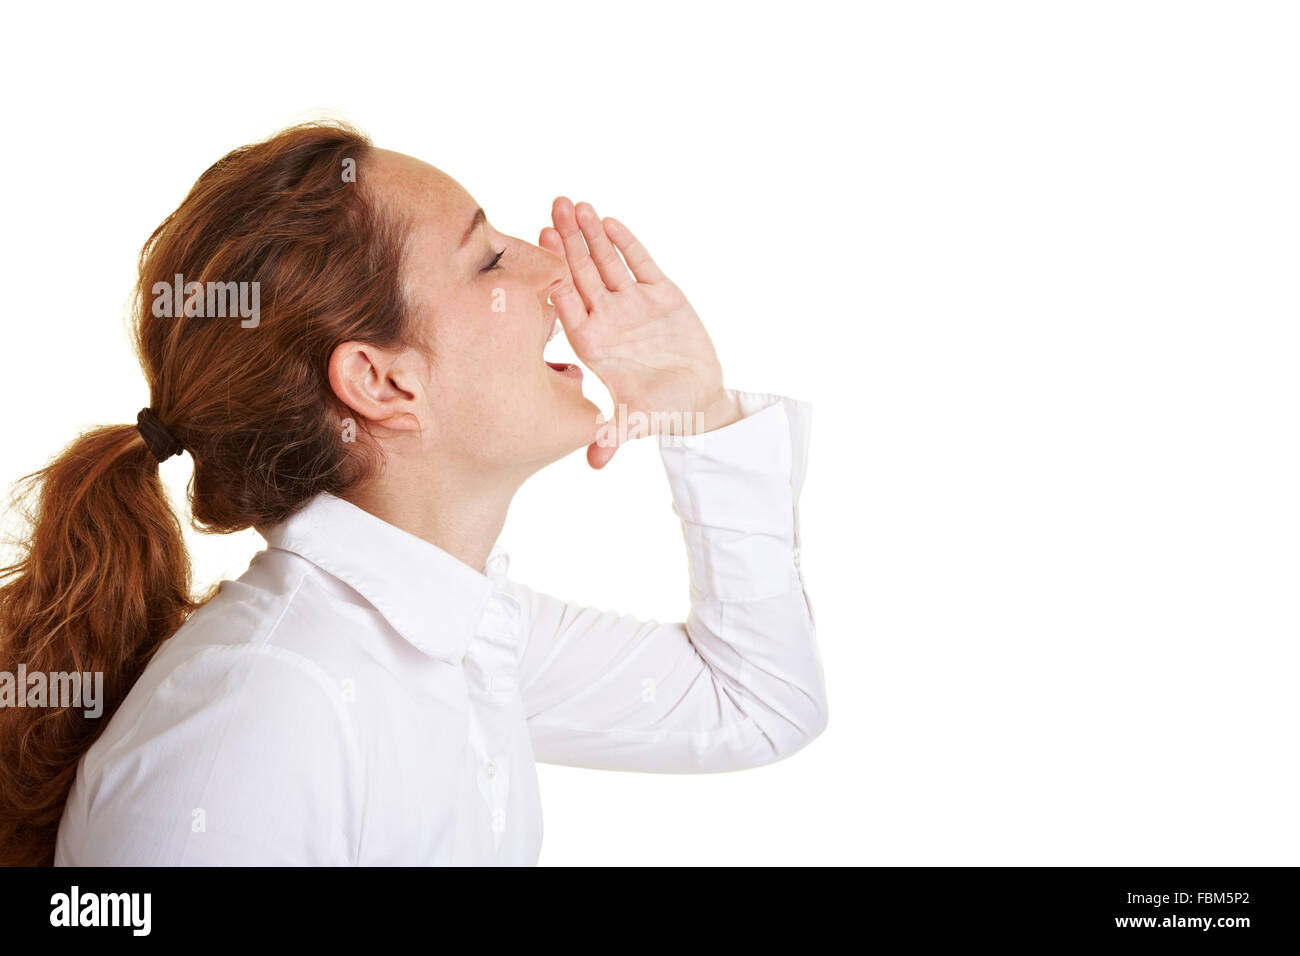 Business woman screaming loudly with hand on her mouth Stock Photo